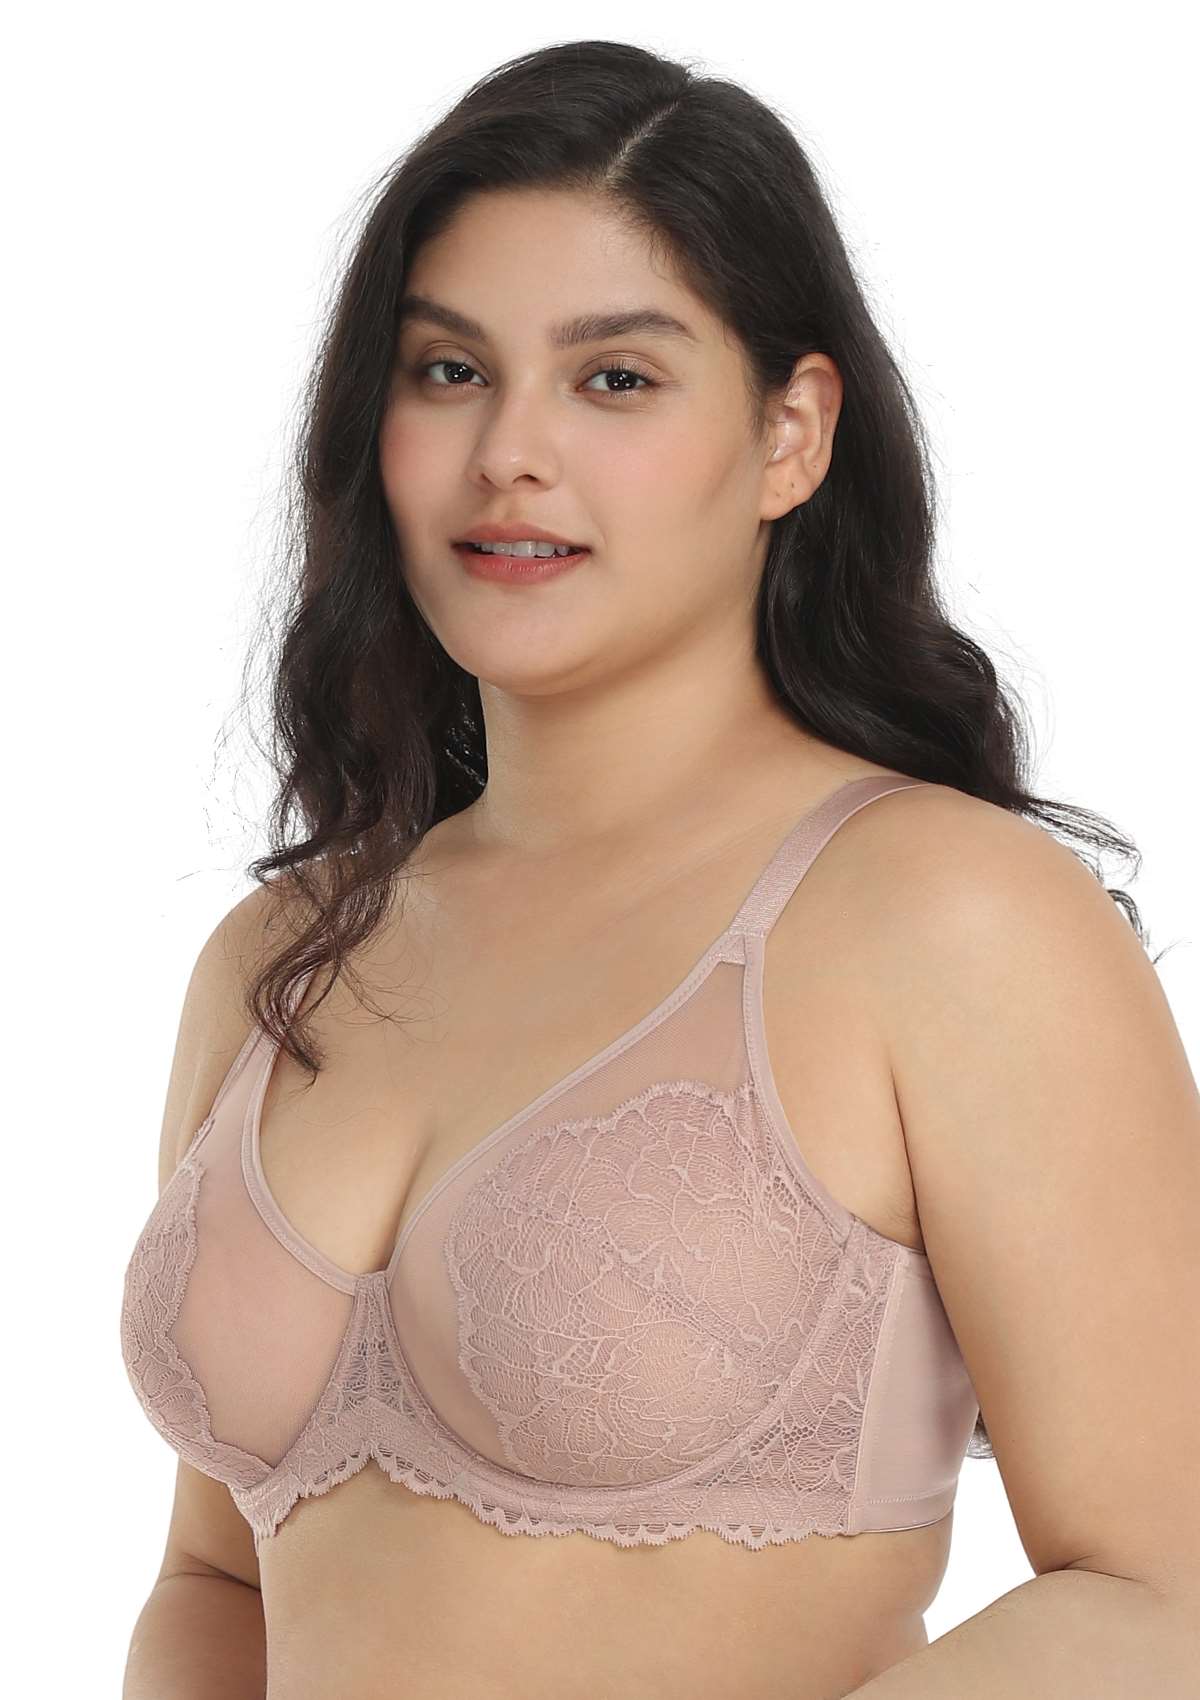 HSIA Blossom Lace Bra And Panties Set: Best Bra For Large Busts - Dark Pink / 36 / DD/E